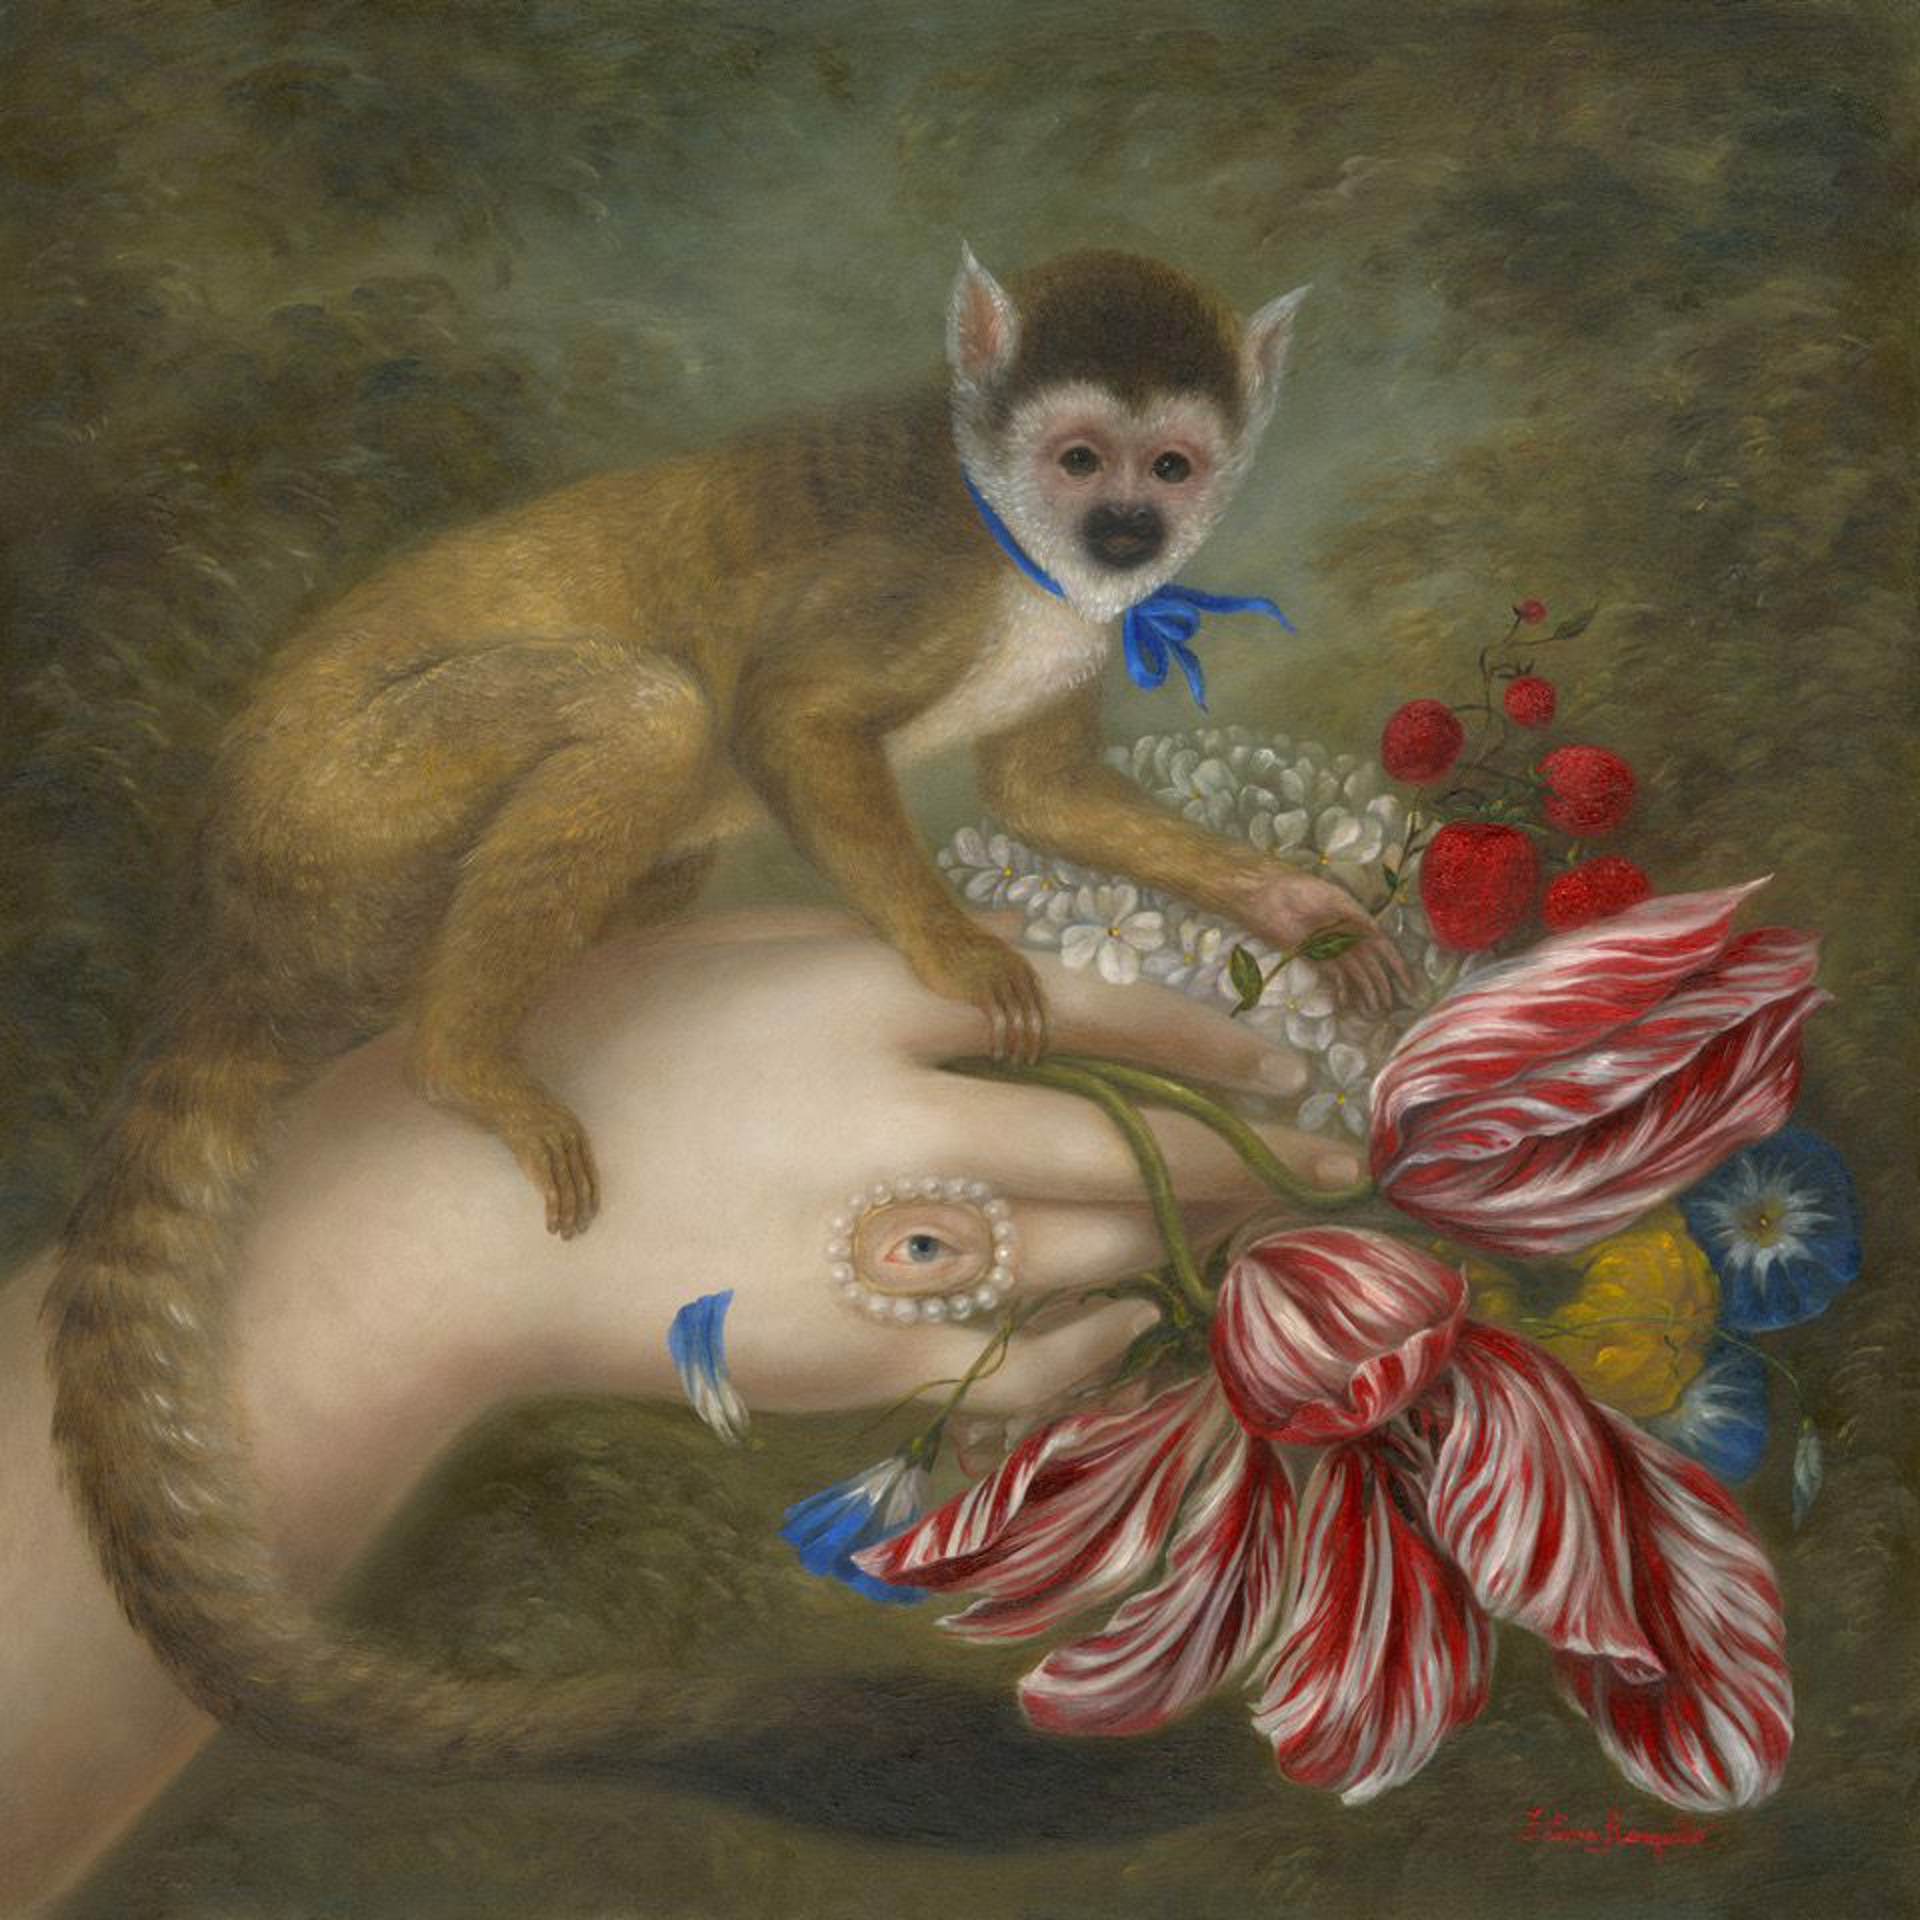 Hand with Squirrel Monkey and Lover’s Eye by Fatima Ronquillo